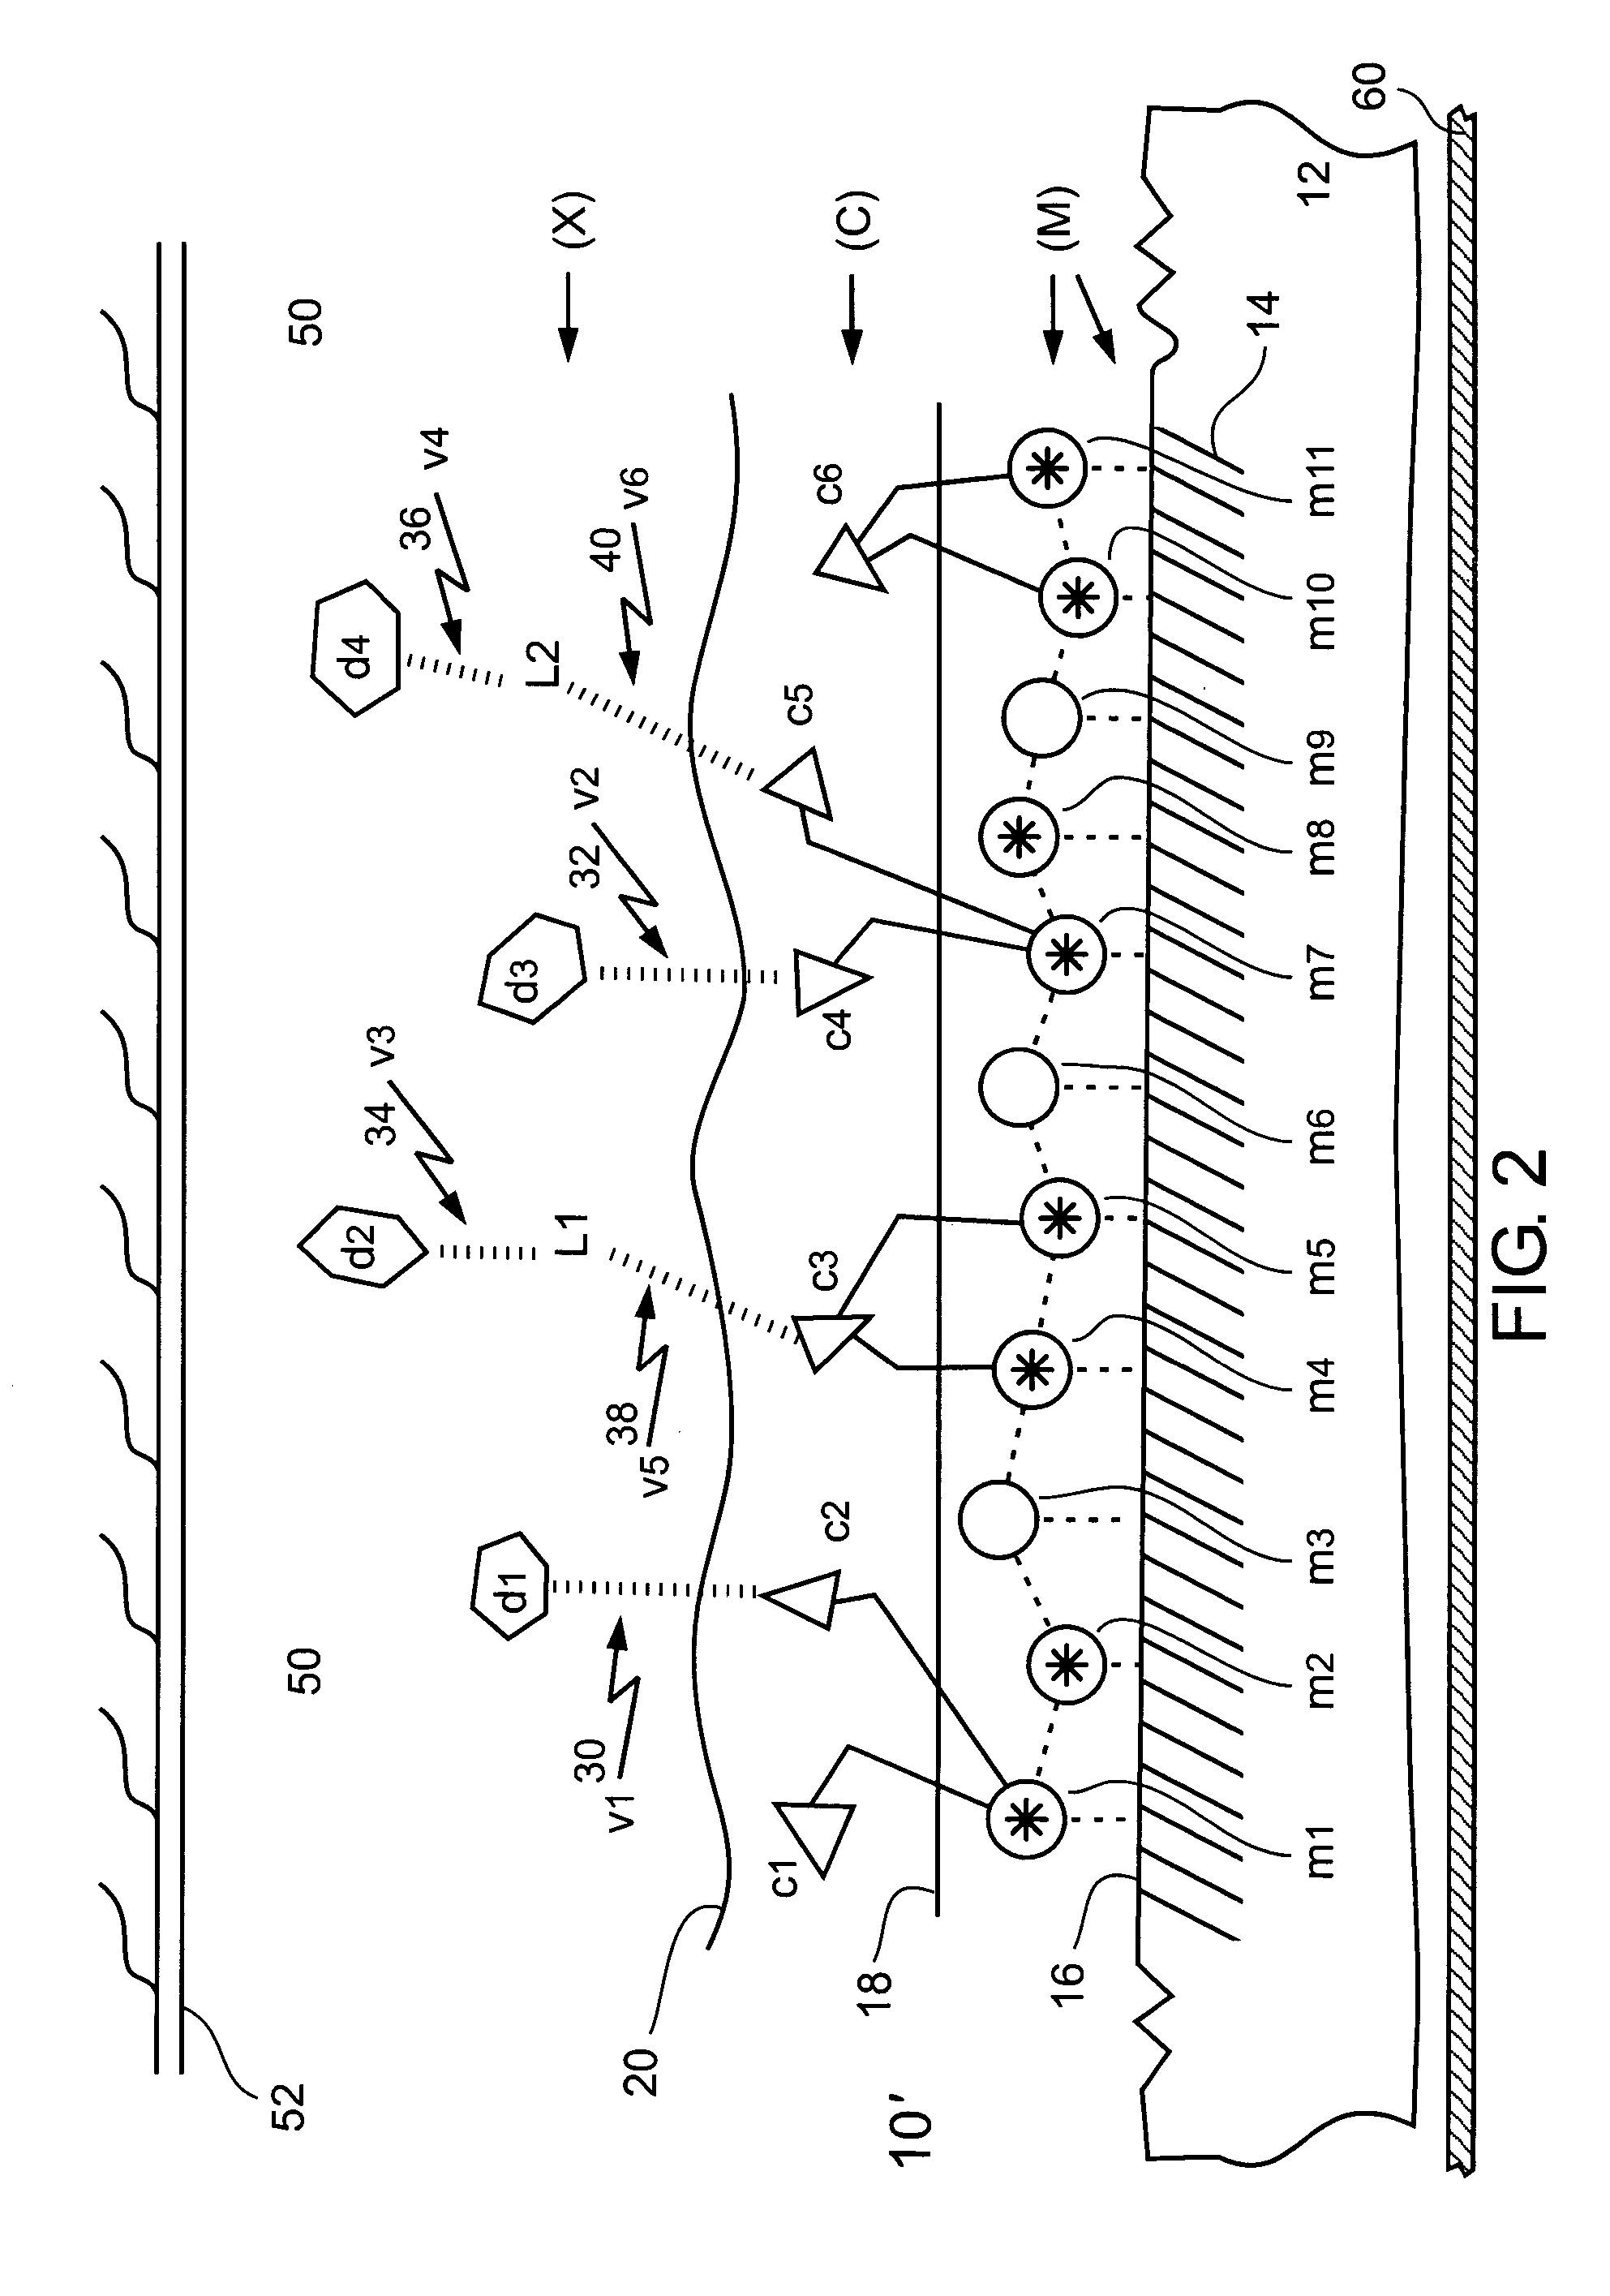 Chelating and binding chemicals to a medical implant, medical device formed, and therapeutic applications